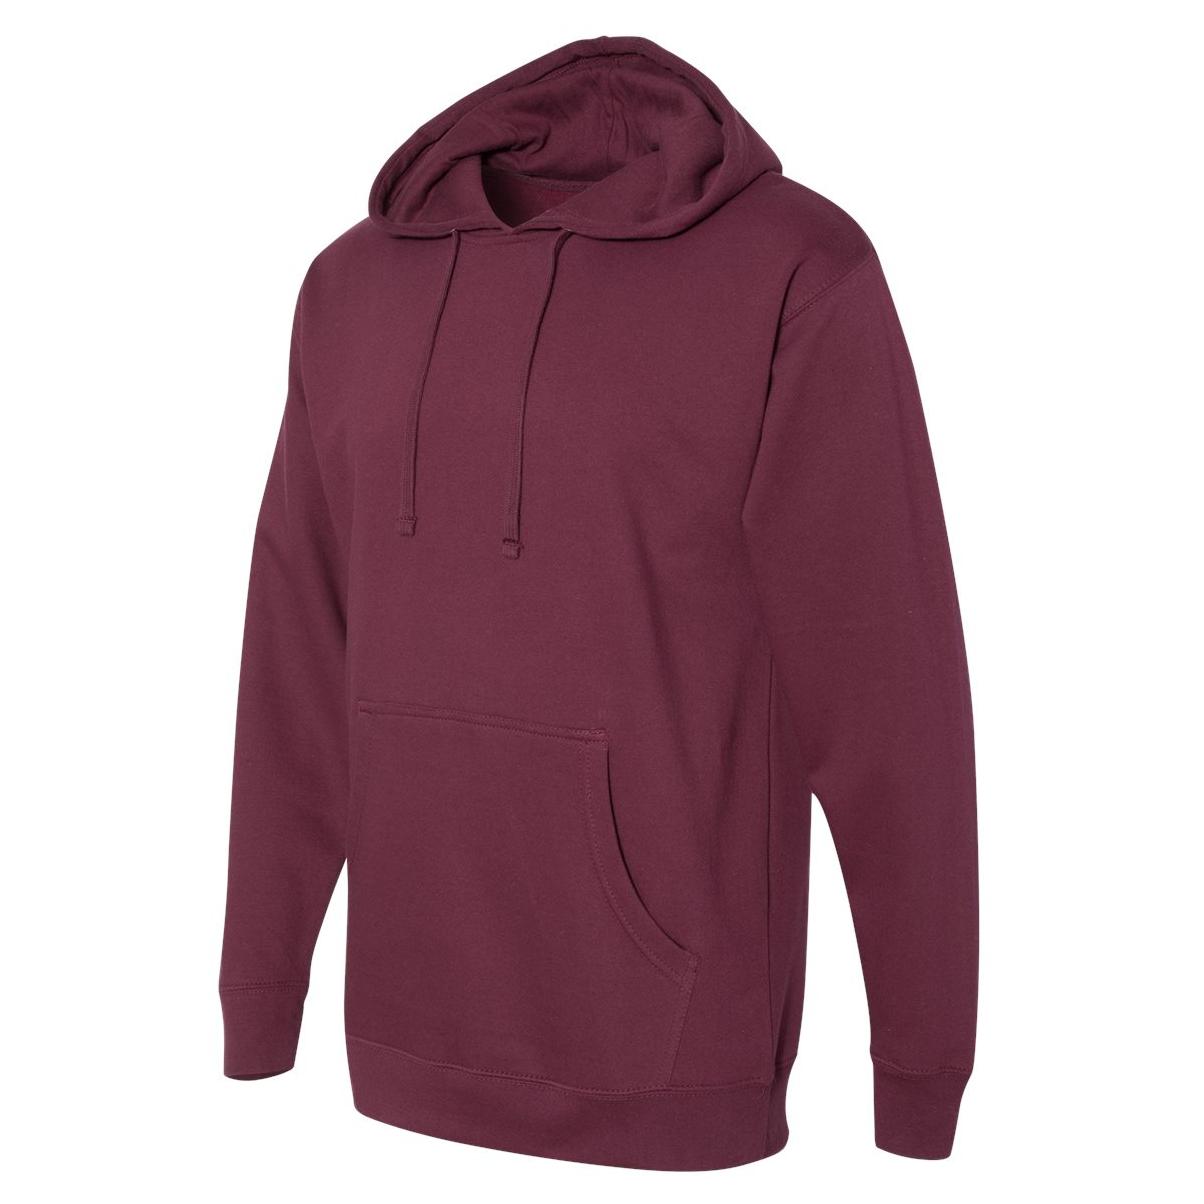 Independent Trading Co. SS4500 Midweight Hooded Sweatshirt - Maroon ...